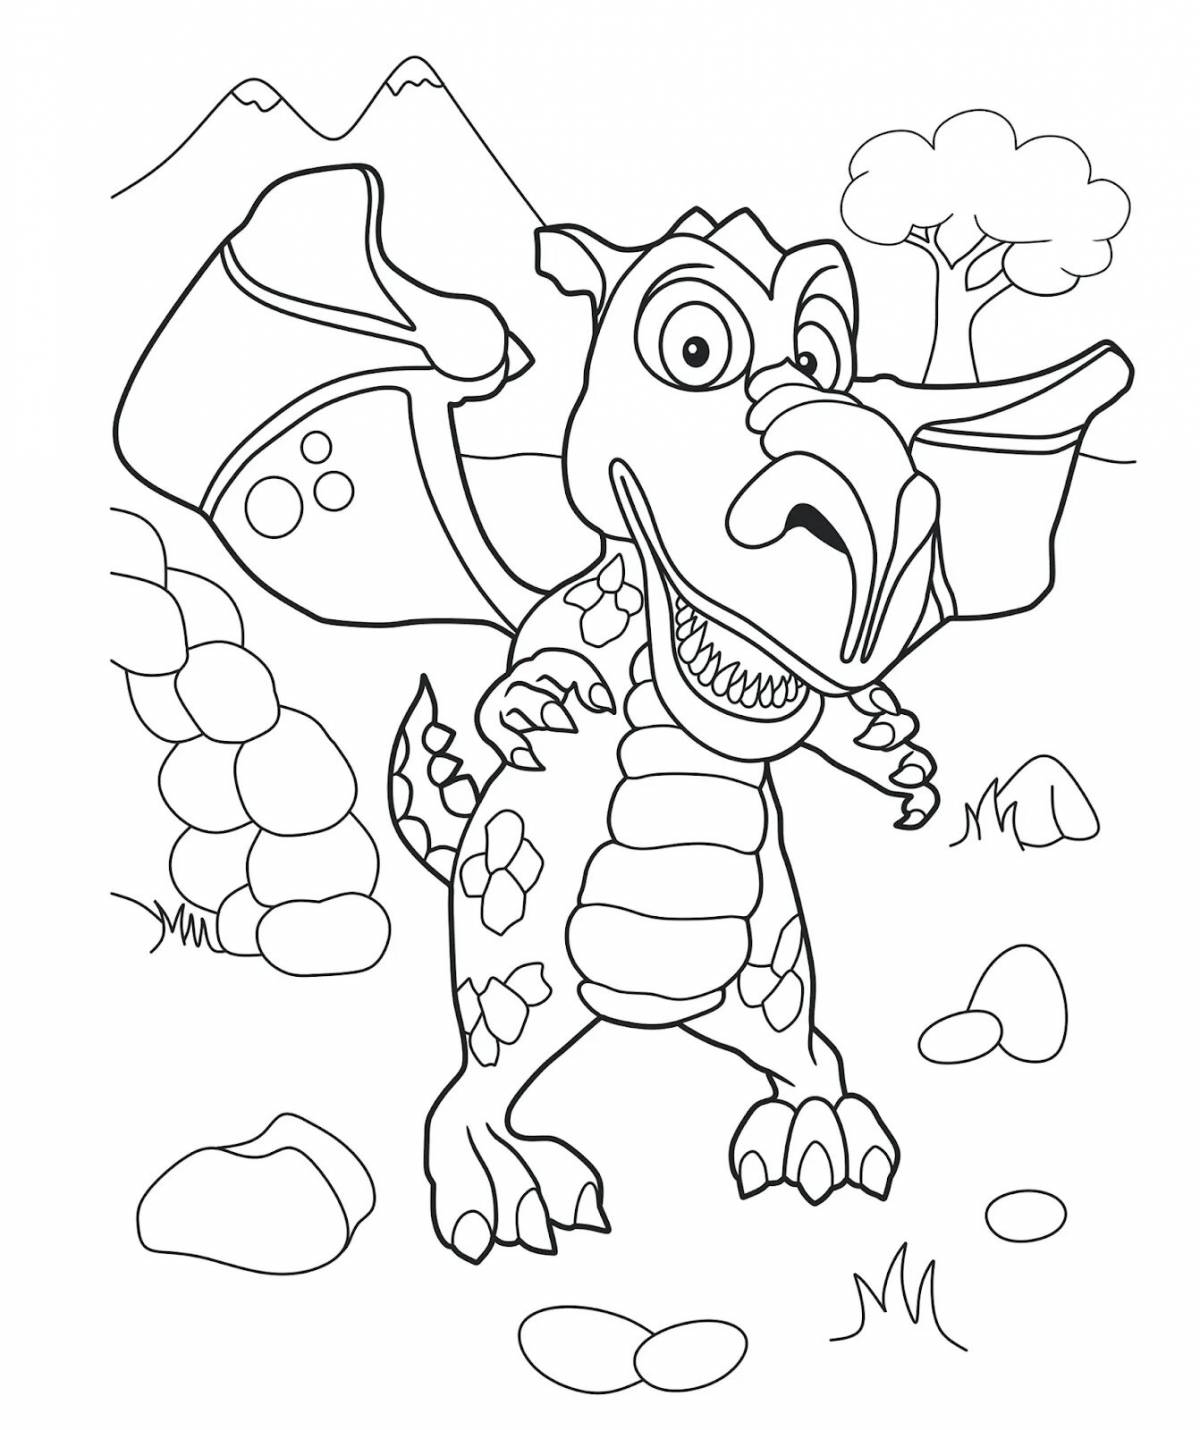 Radiant coloring page knight mike